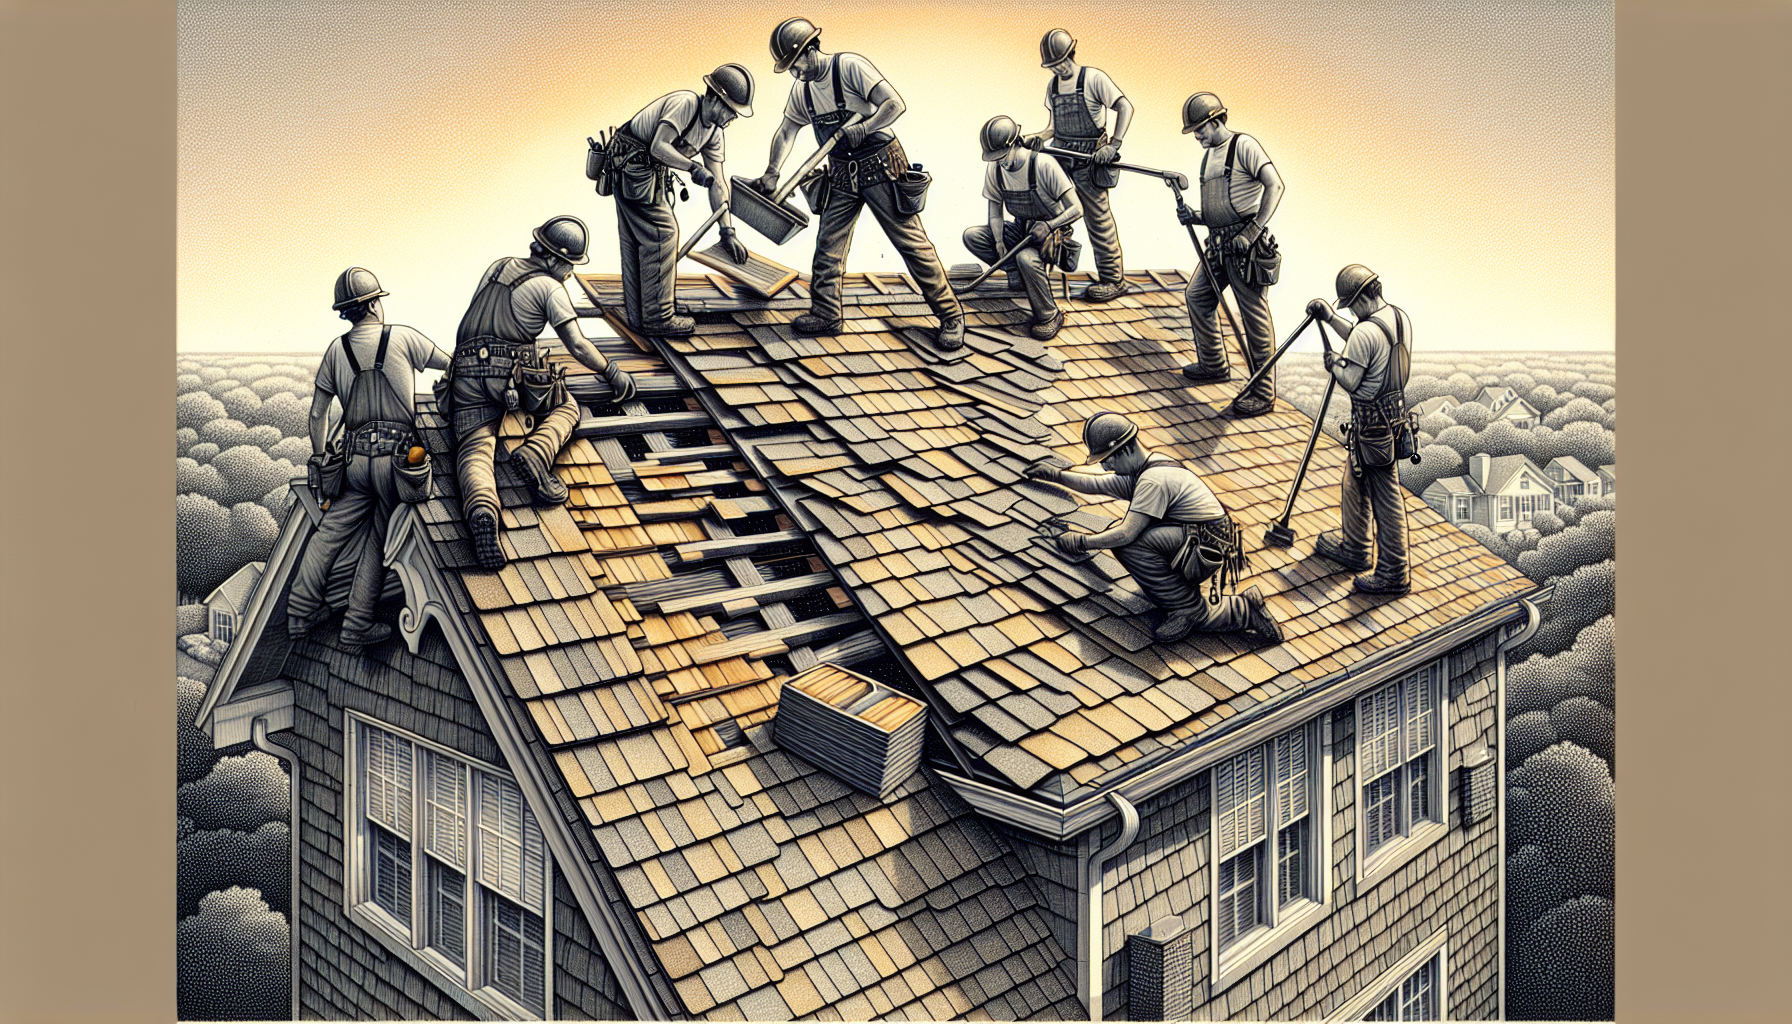 Illustration of a reputable roofing company working on a roof replacement